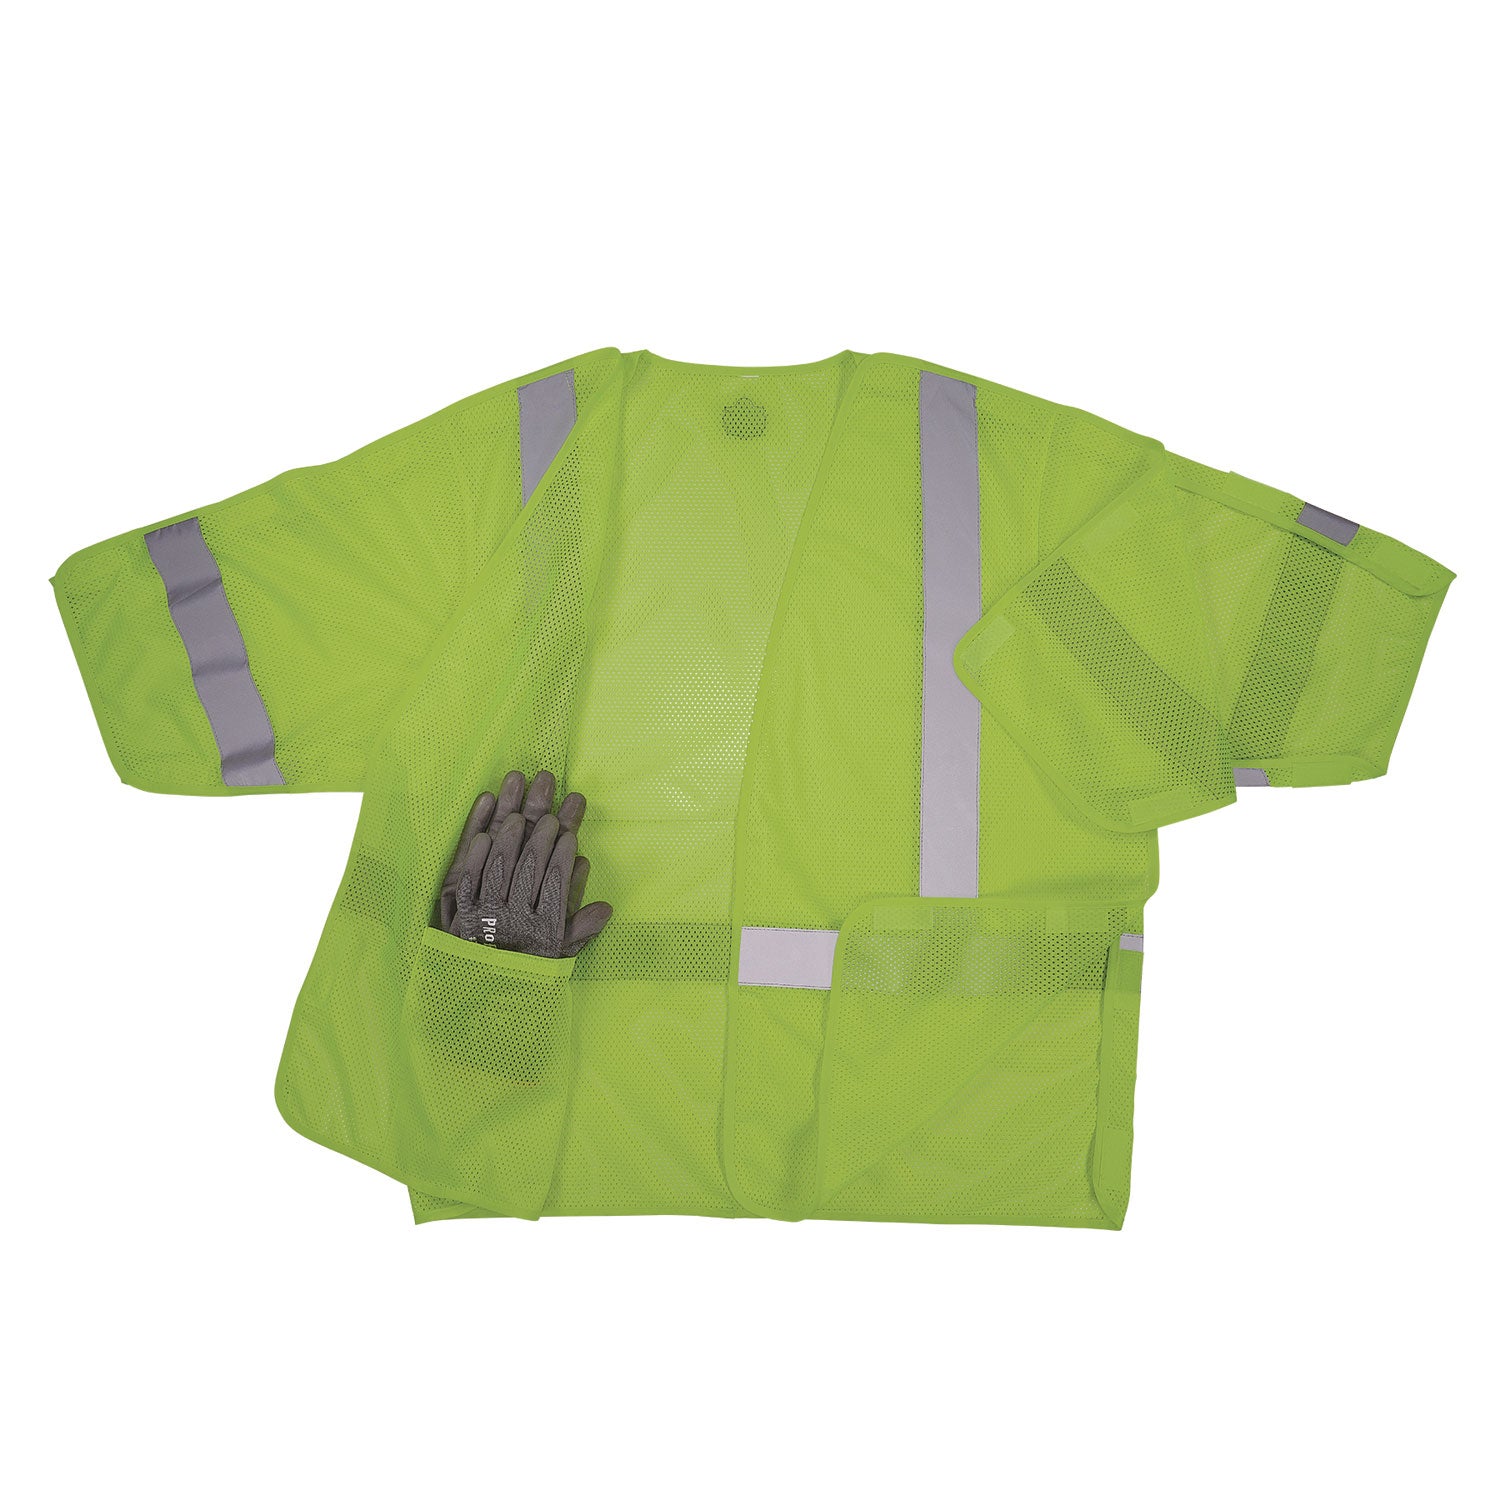 glowear-8315ba-class-3-hi-vis-breakaway-safety-vest-2x-large-to-3x-large-lime-ships-in-1-3-business-days_ego23057 - 2